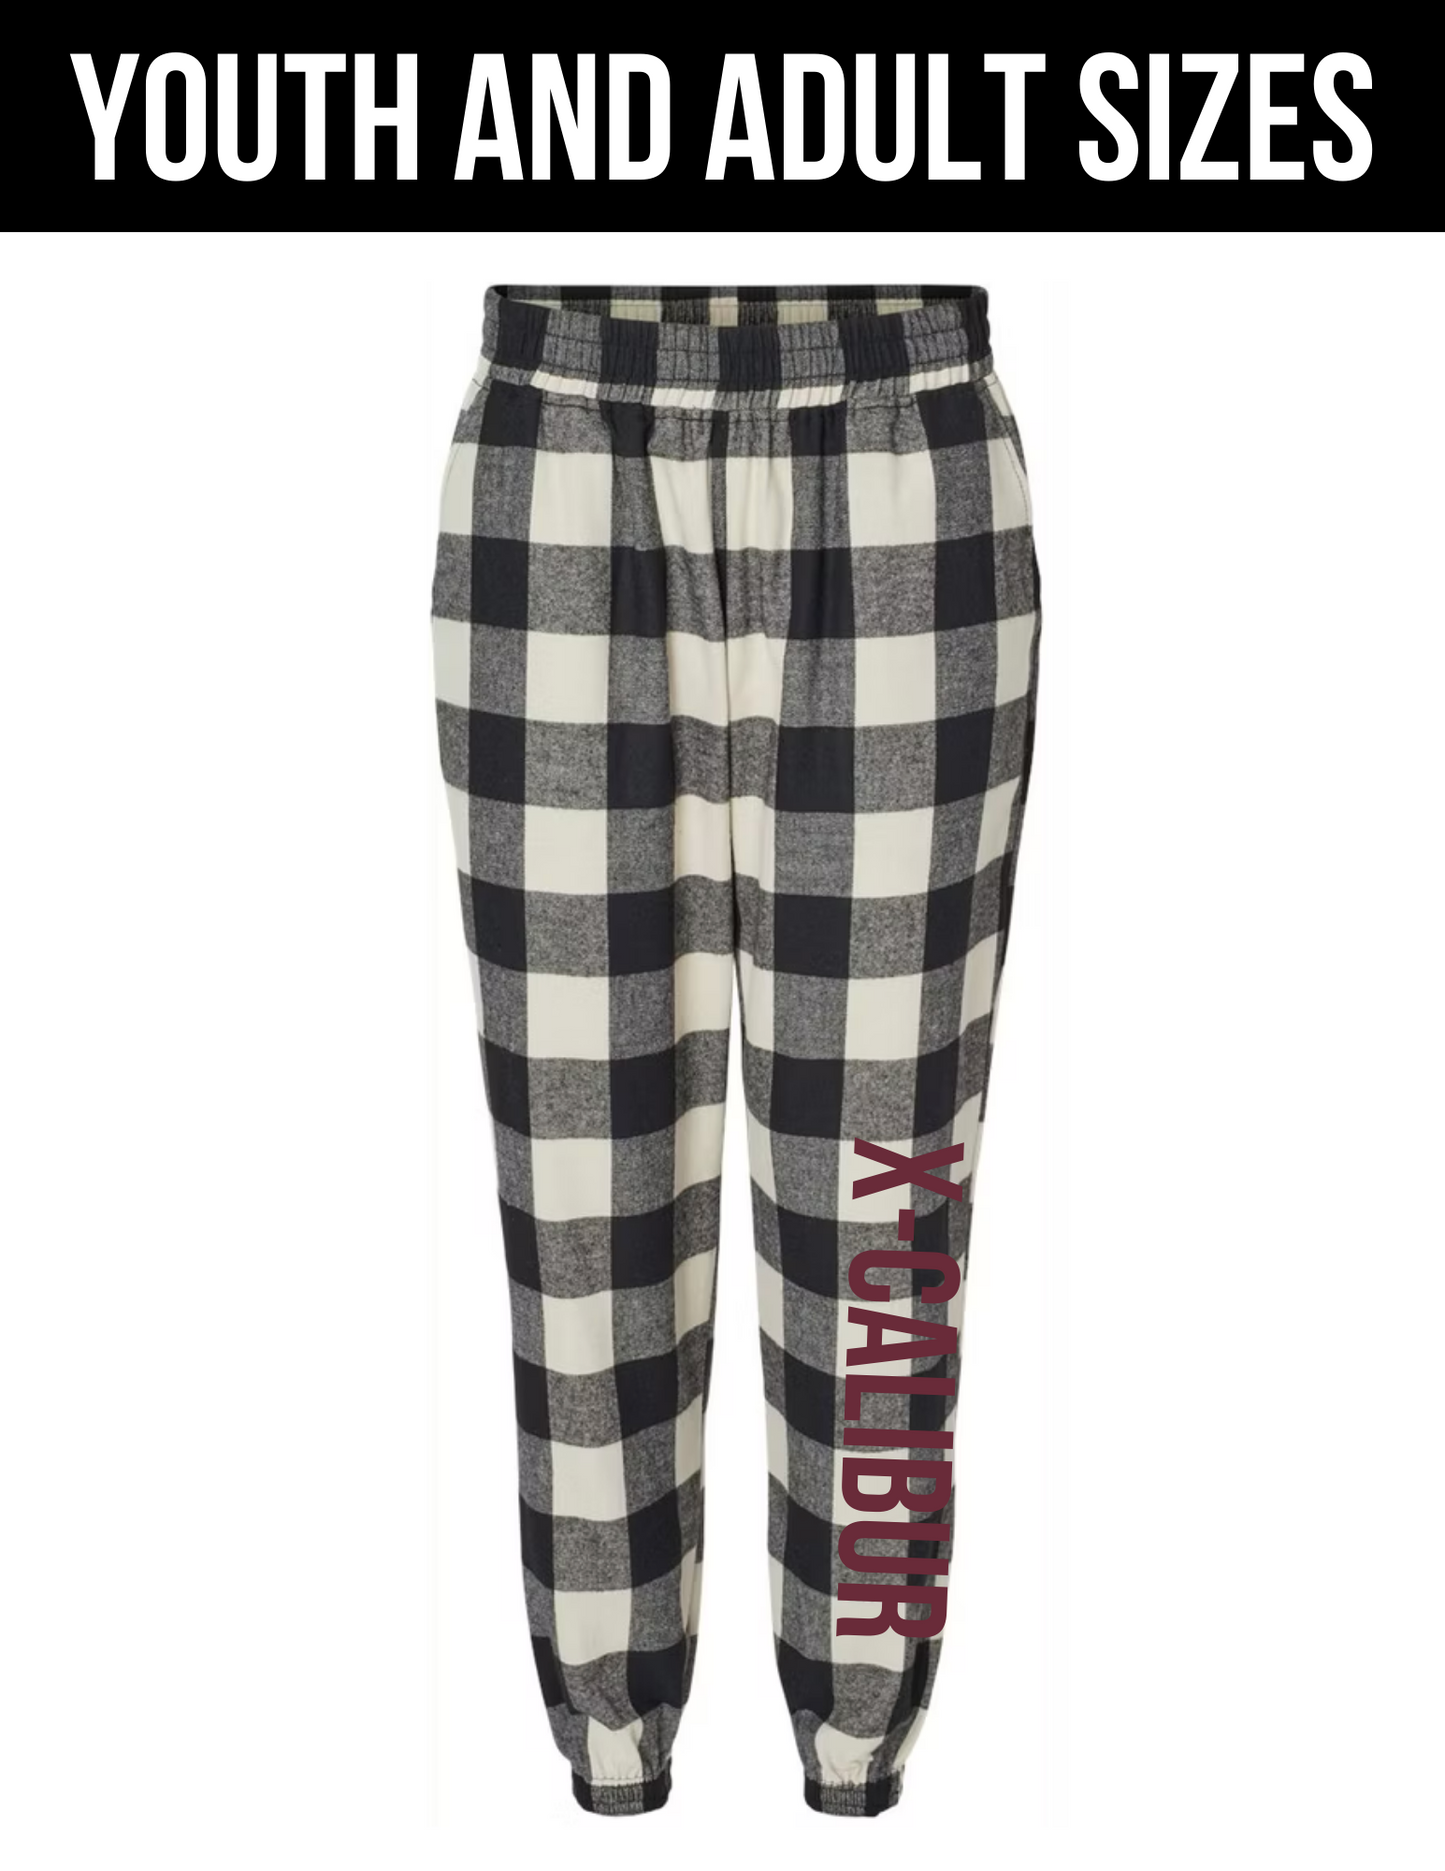 Flannel Jogger Pants-Youth and Adult Sizes